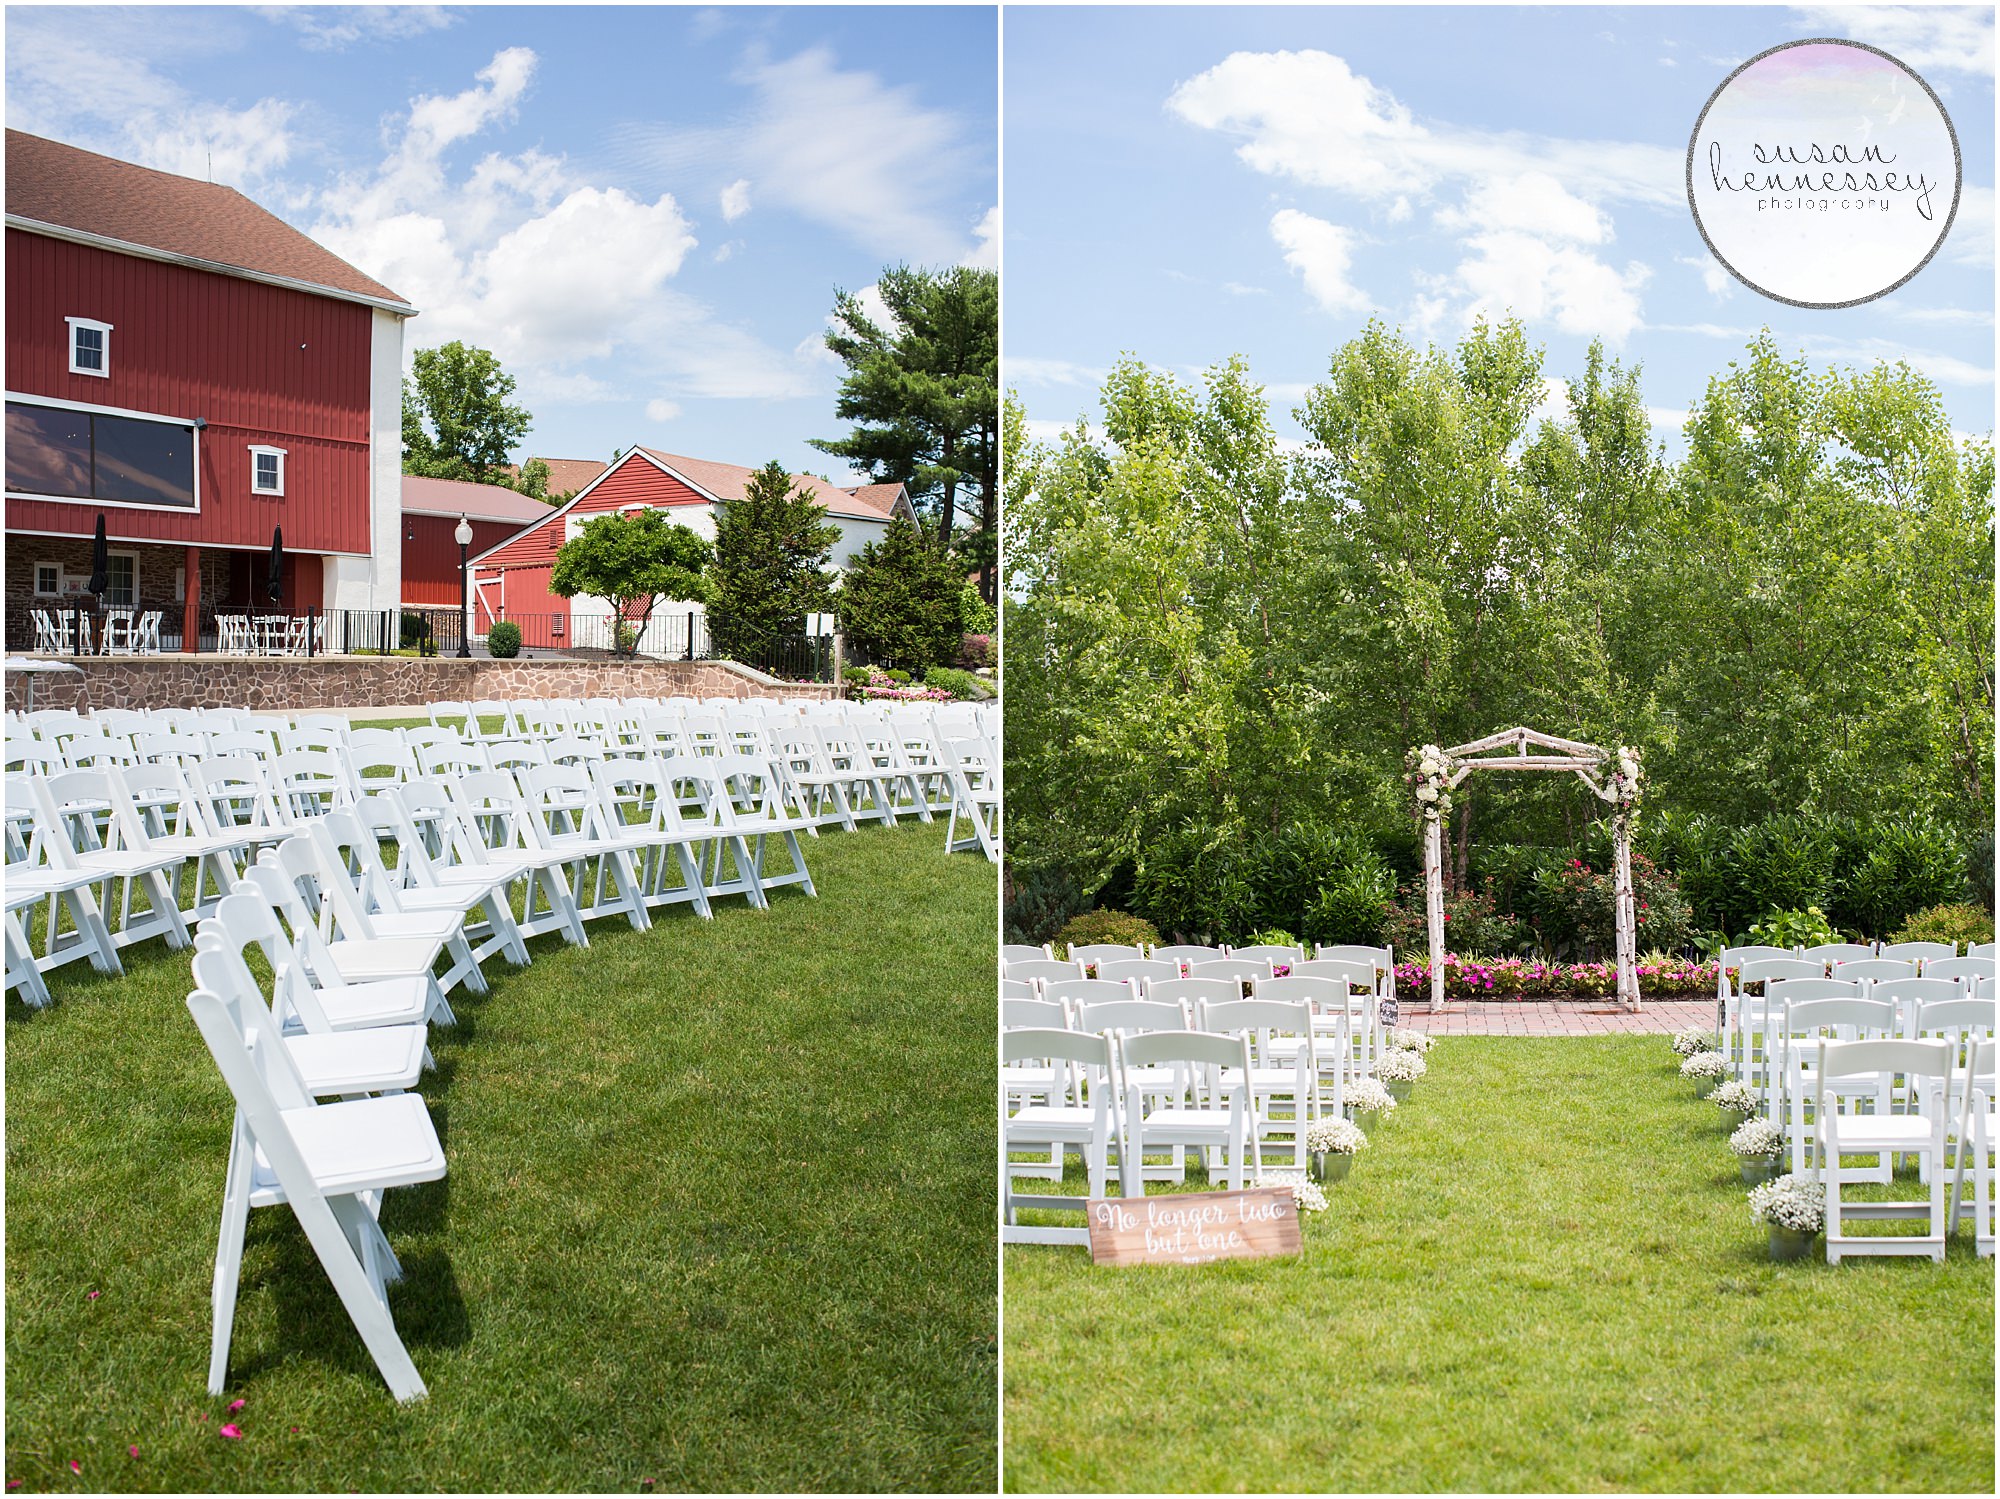 Exterior of Barn and Bridge along with the outdoor ceremony site.